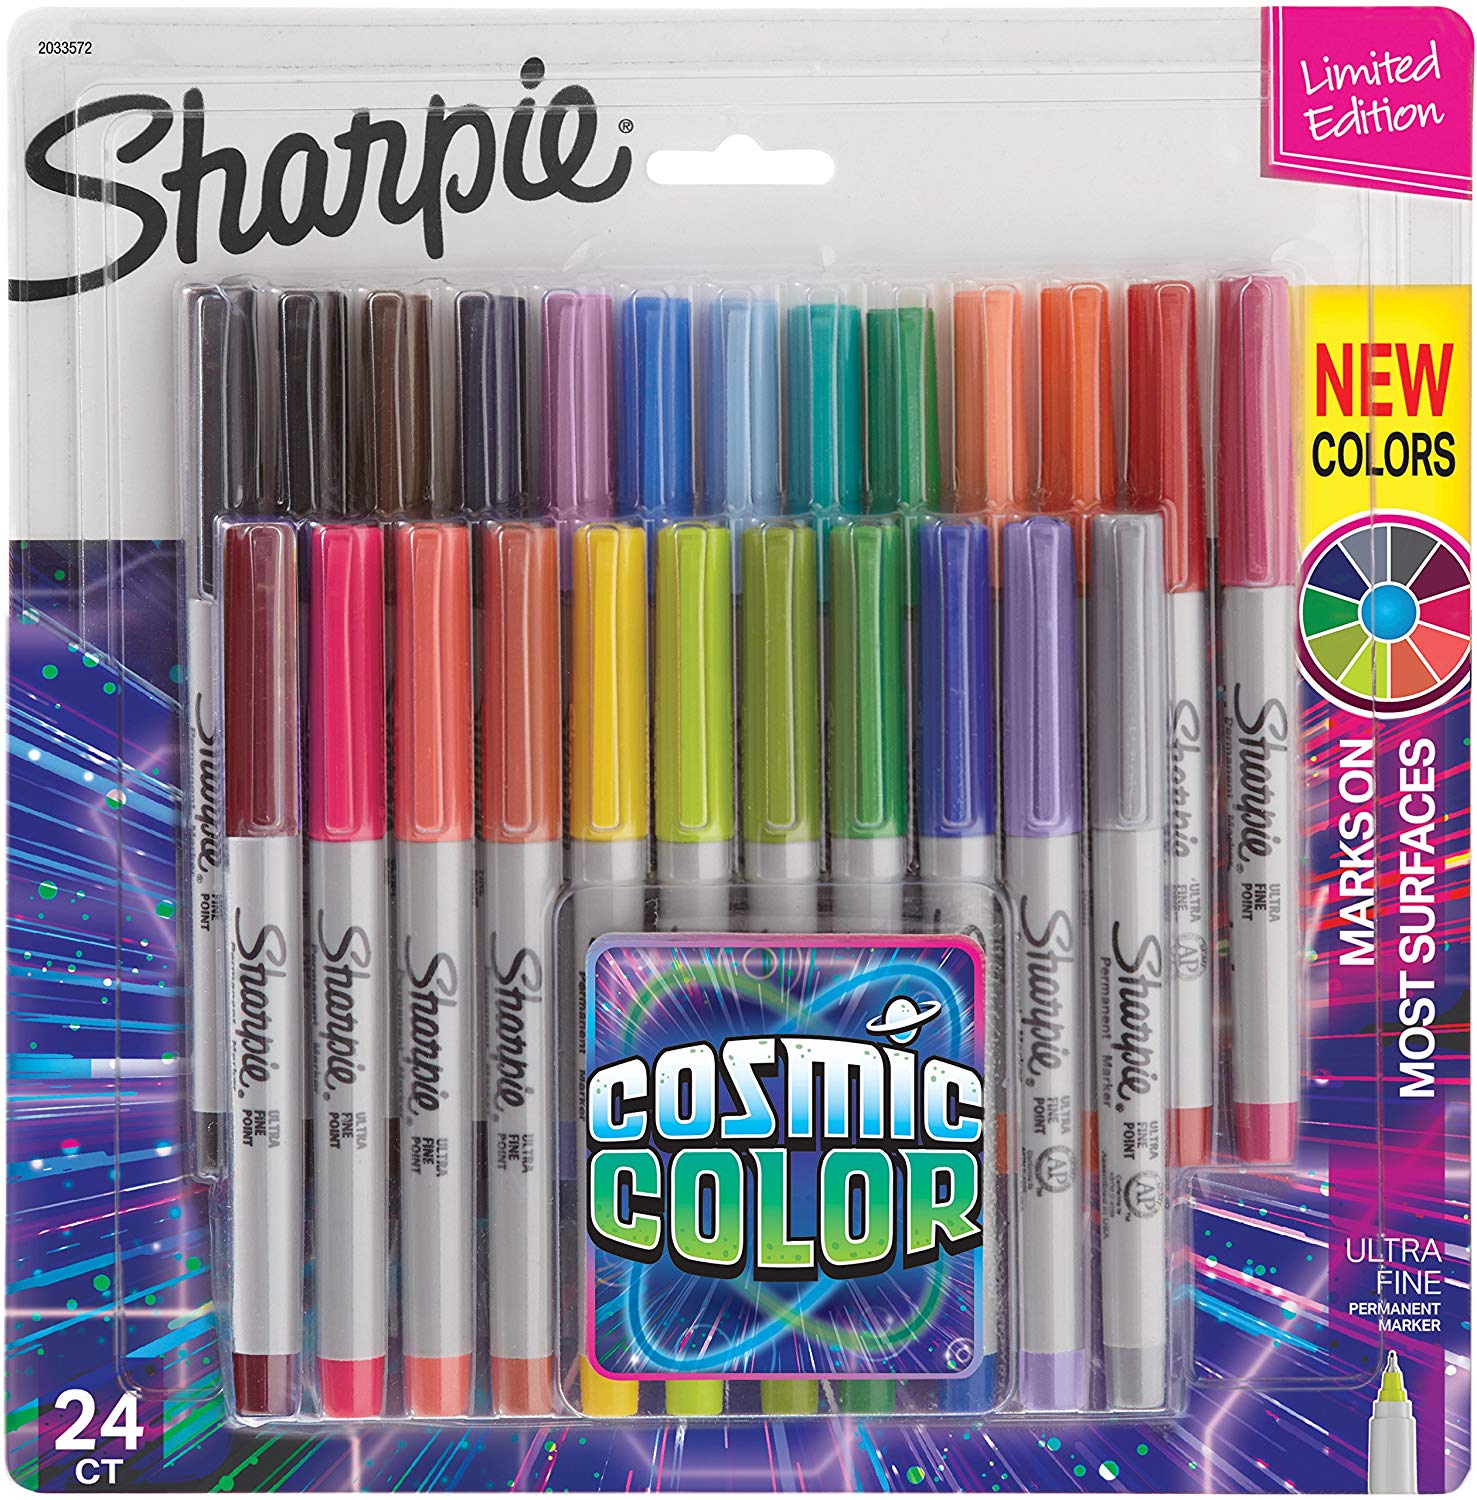 DEAL ALERT: Sharpies Ultra Fine Point, Cosmic Color, 24 Count – 60% off!